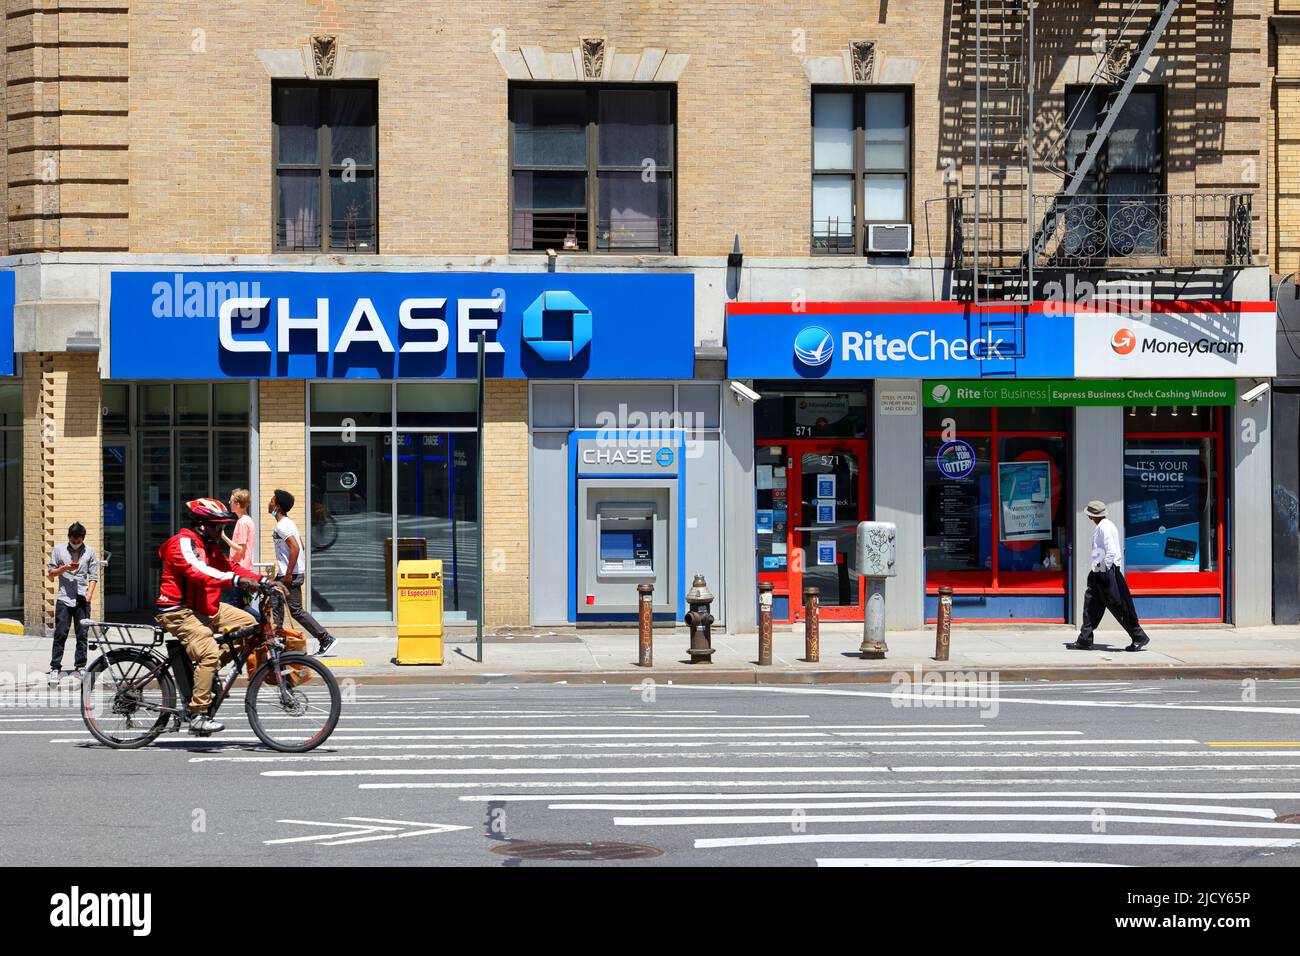 Chase Bank, 3200 Broadway, RiteCheck, 571 W 125th St, New York, NY. a check cashing business and lotto agent next to a bank branch in Harlem Stock Photo